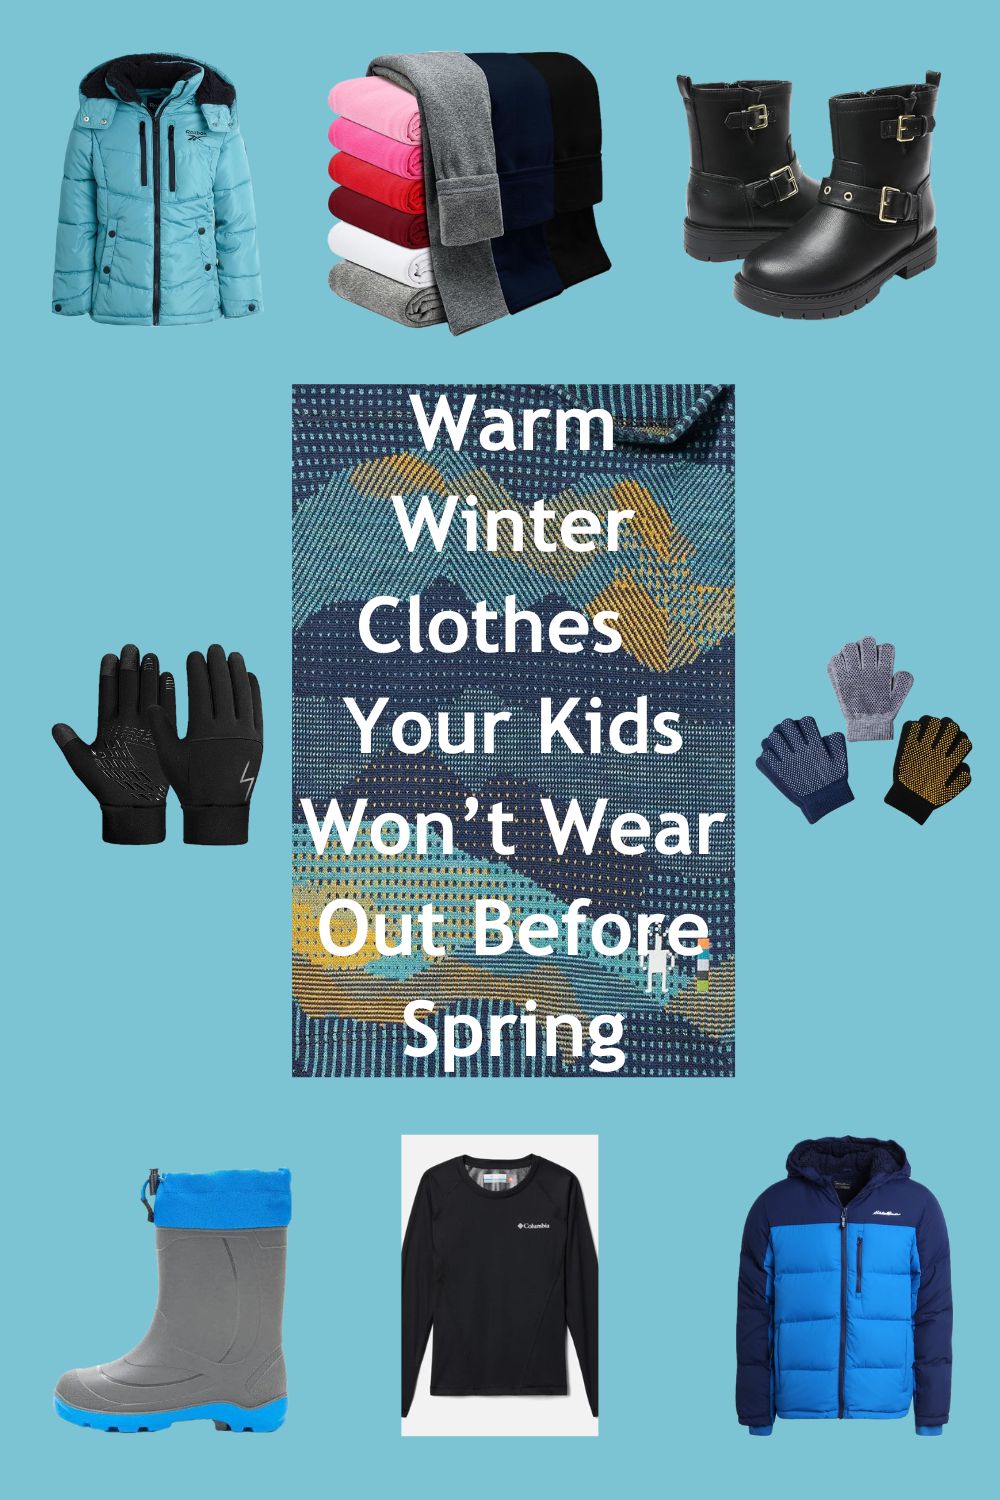 winter clothes have to keep your kids warm and dry and last the season without wearing out. my picks for affordable, high-quality coats, boots, base layers & accessories.